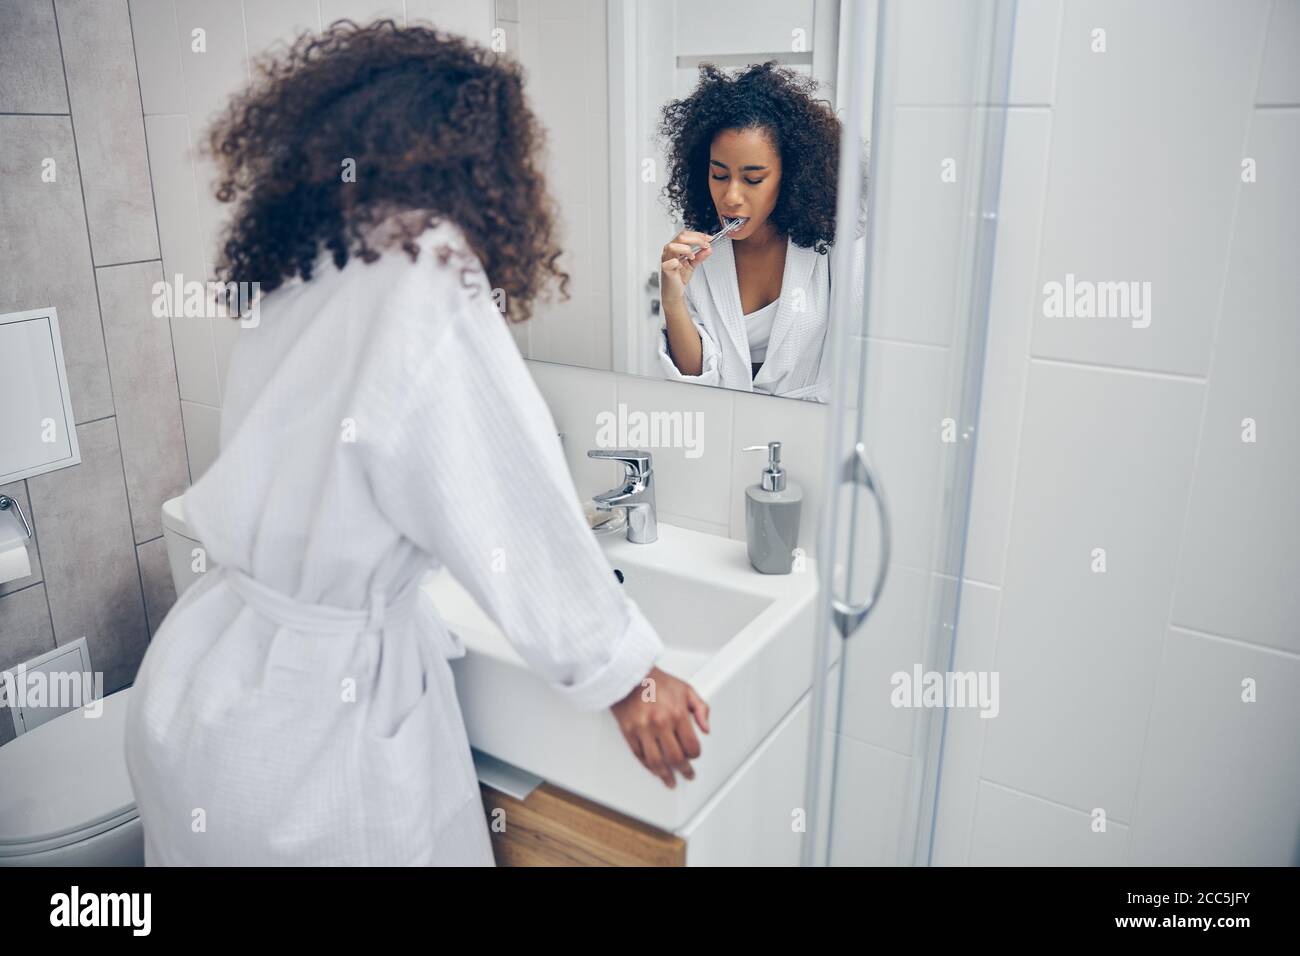 Woman brushing her teeth with her eyes closed Stock Photo